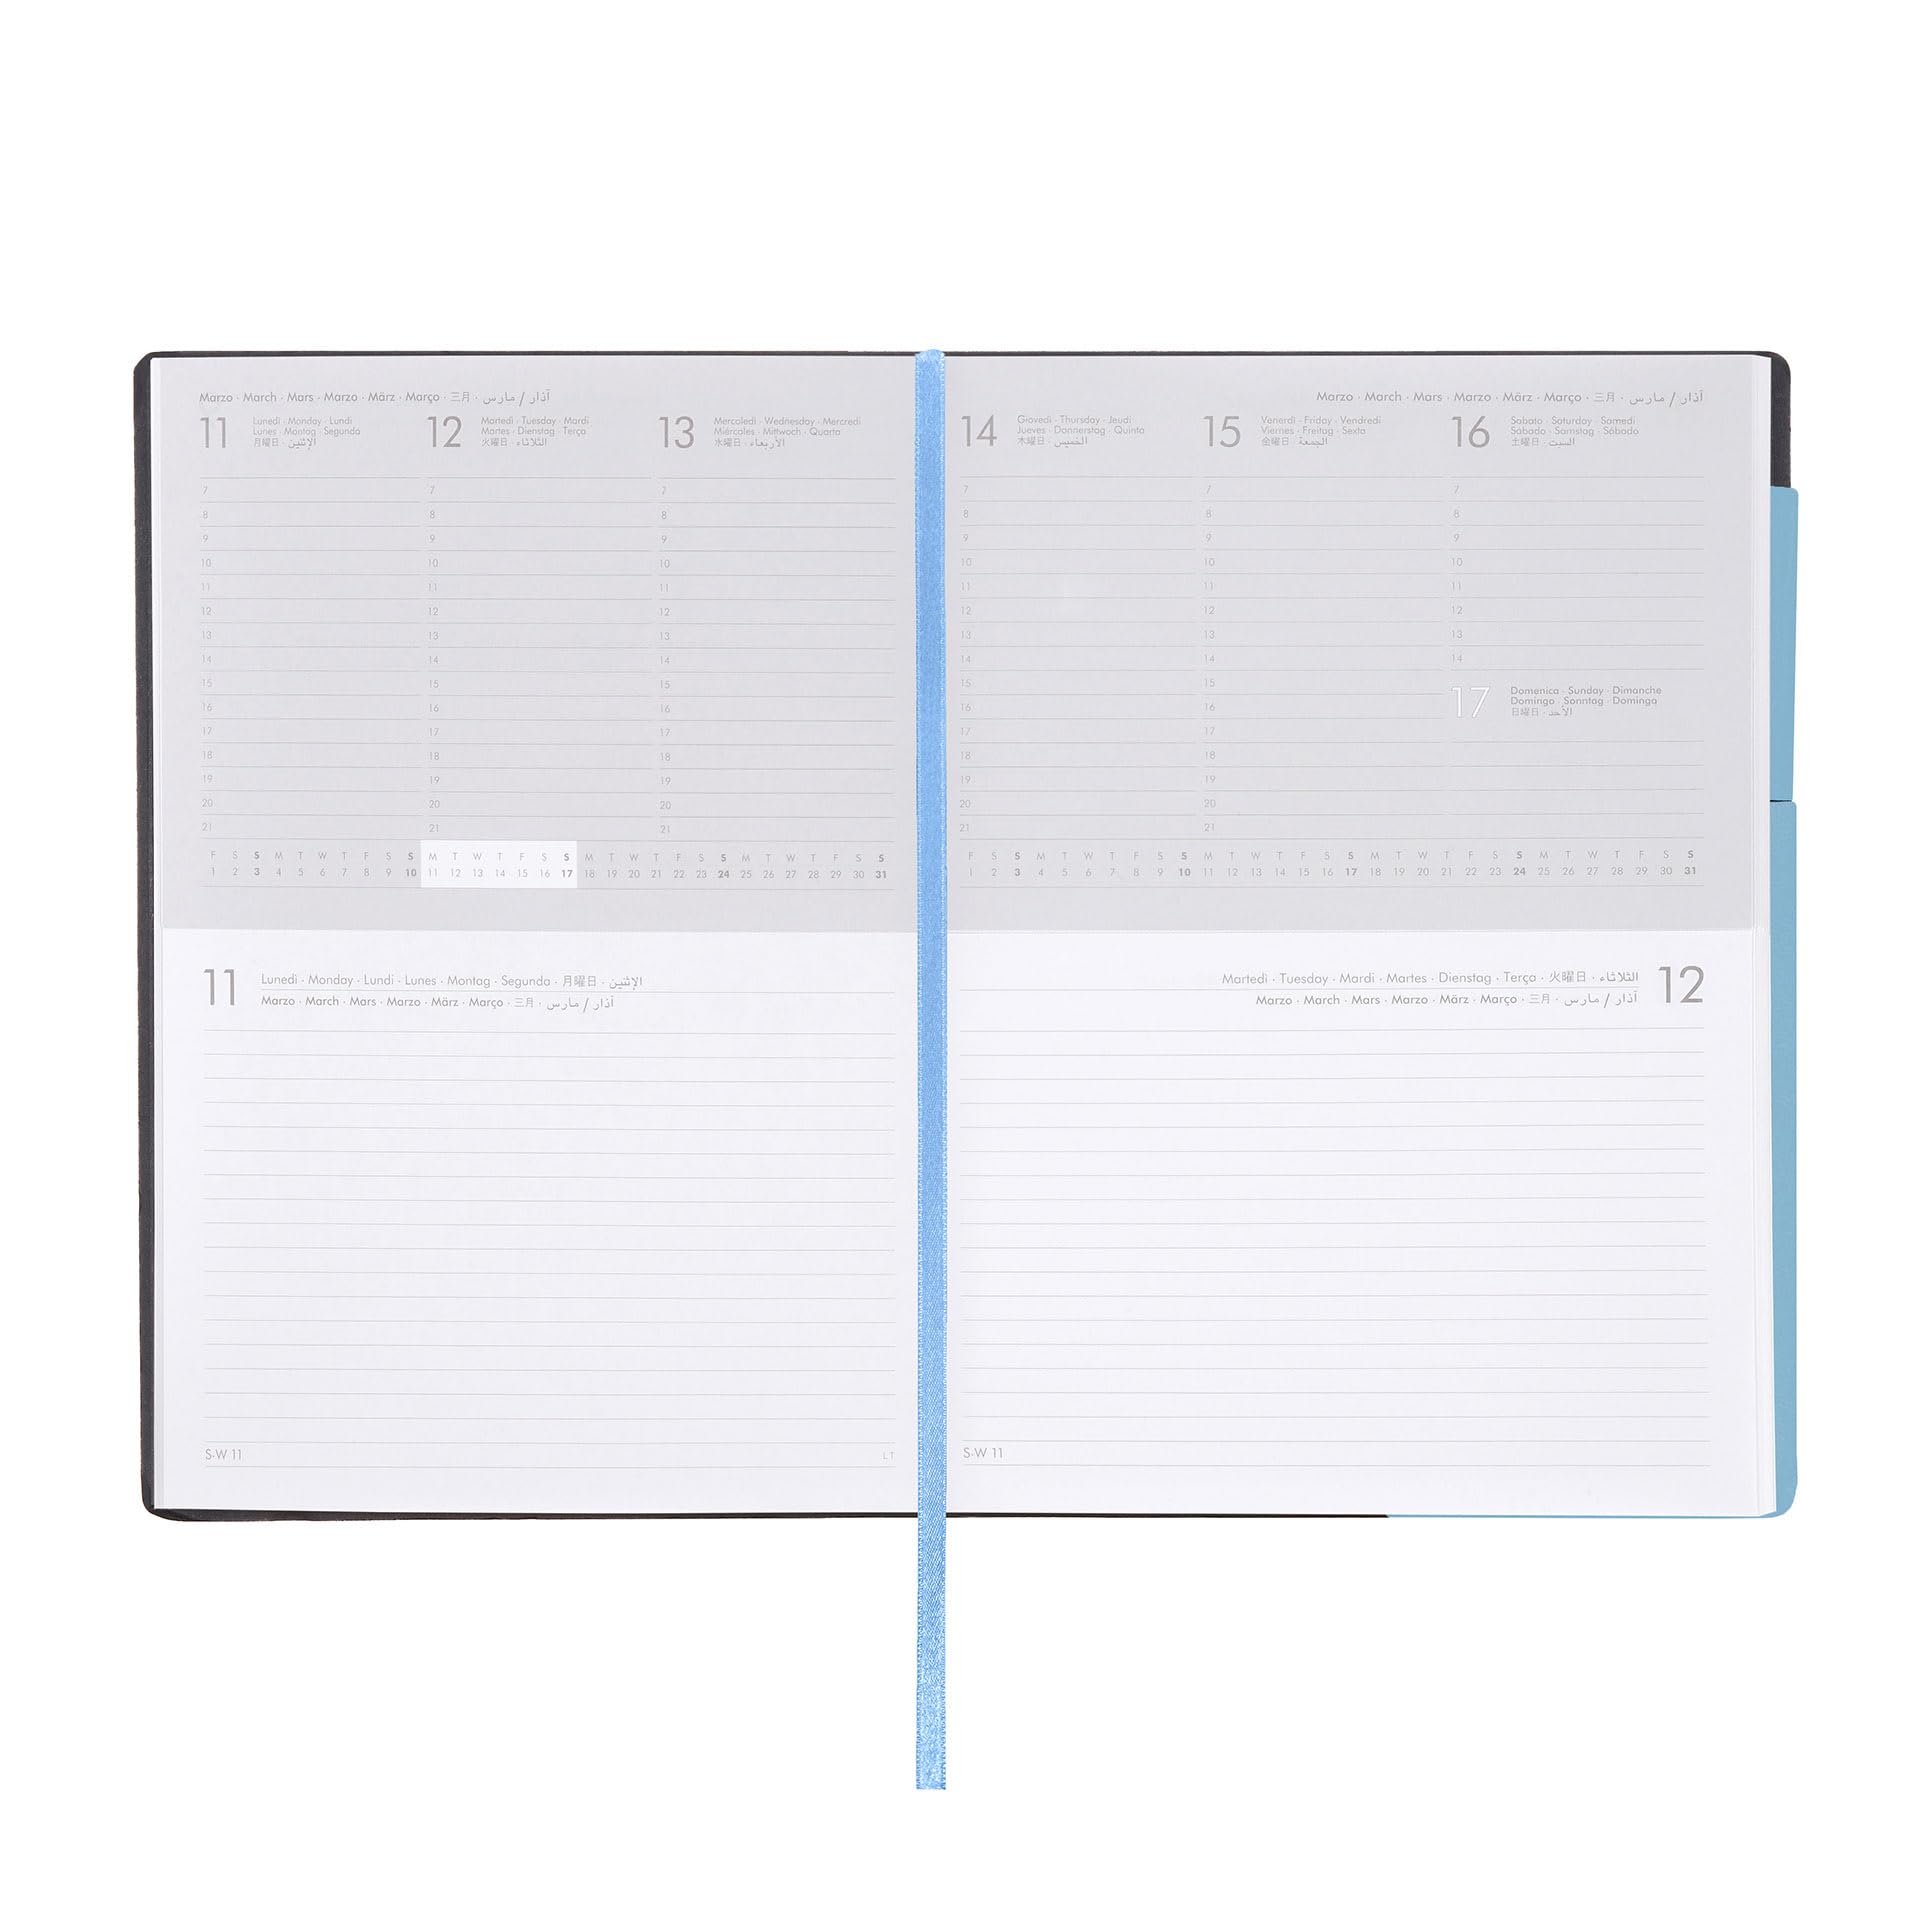 Legami - Large Weekly & Daily Planner, 12 Months, January 2024 December 2024, Detail Days at the top, Week Vision at the bottom, 17x24 cm, Color Crystal blue